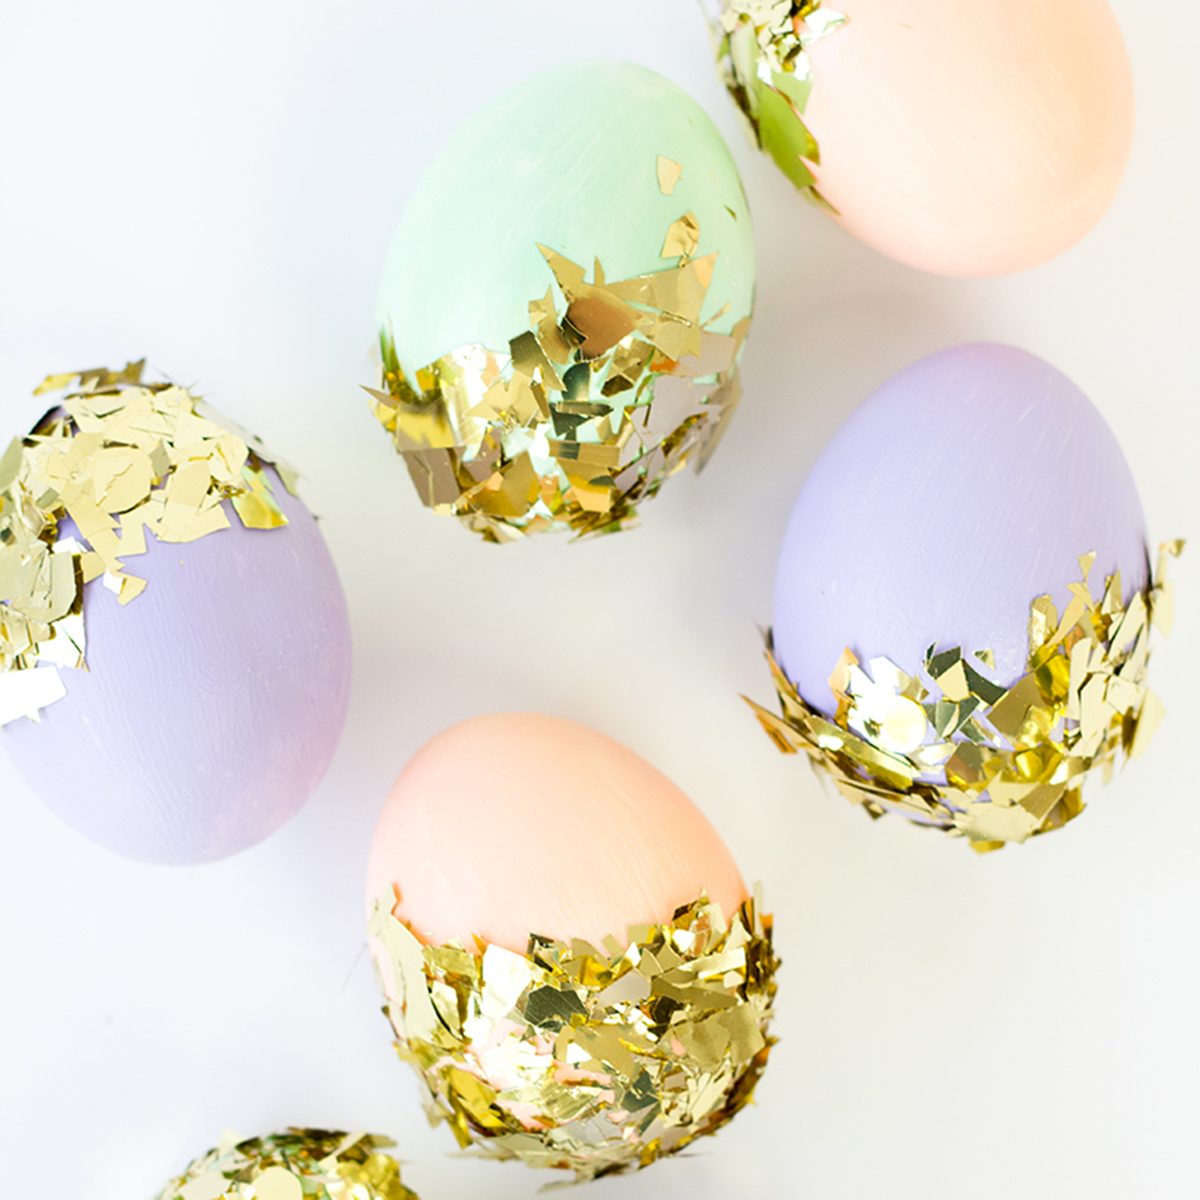 Confetti-dipped Easter eggs